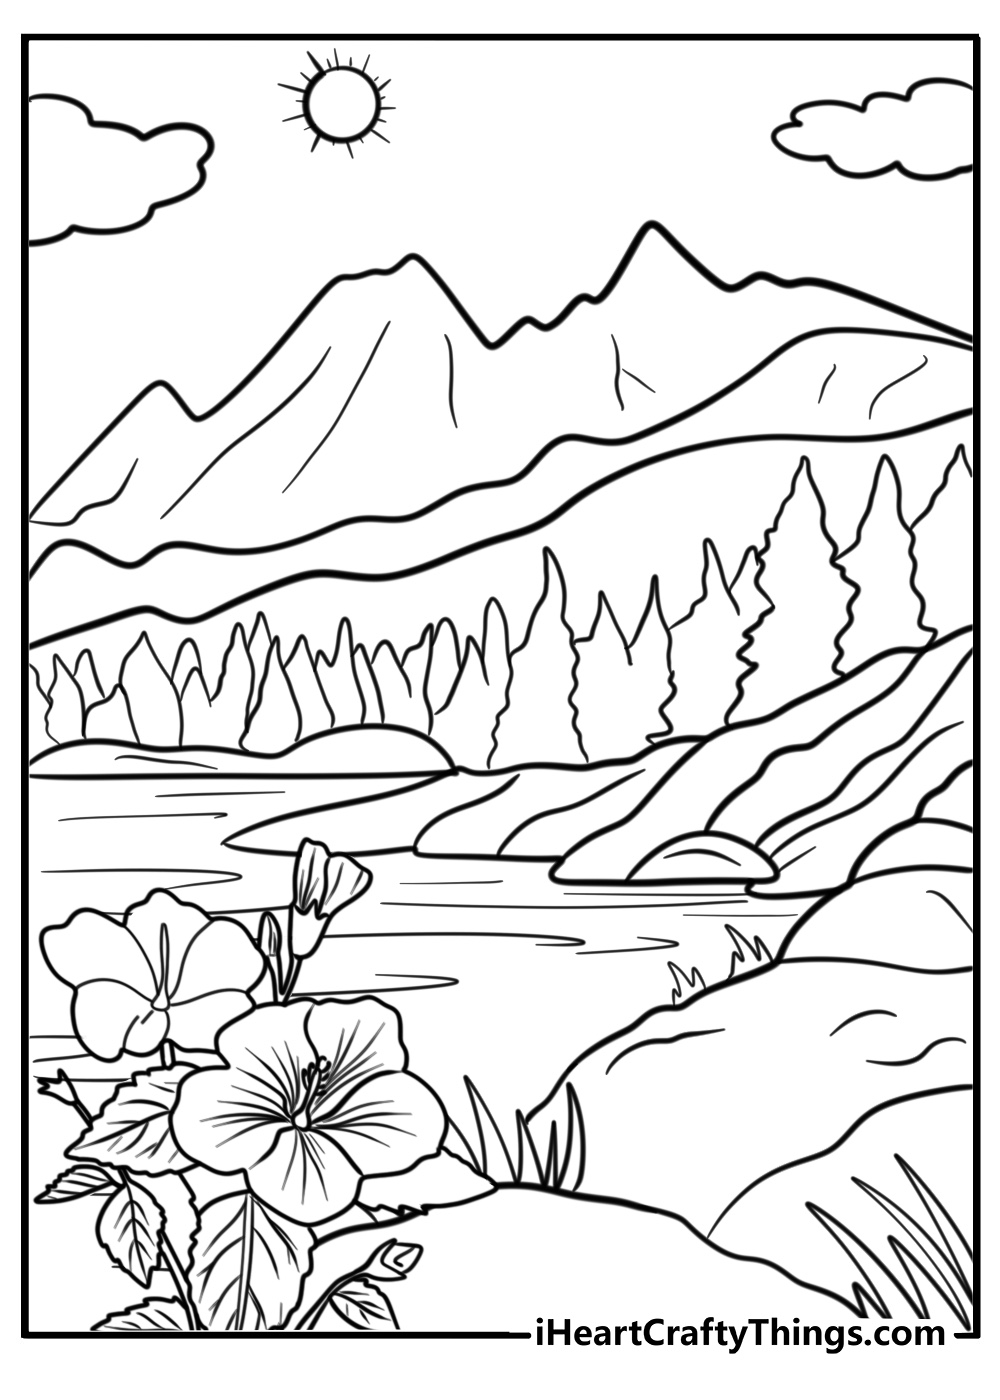 Nature adult coloring pages